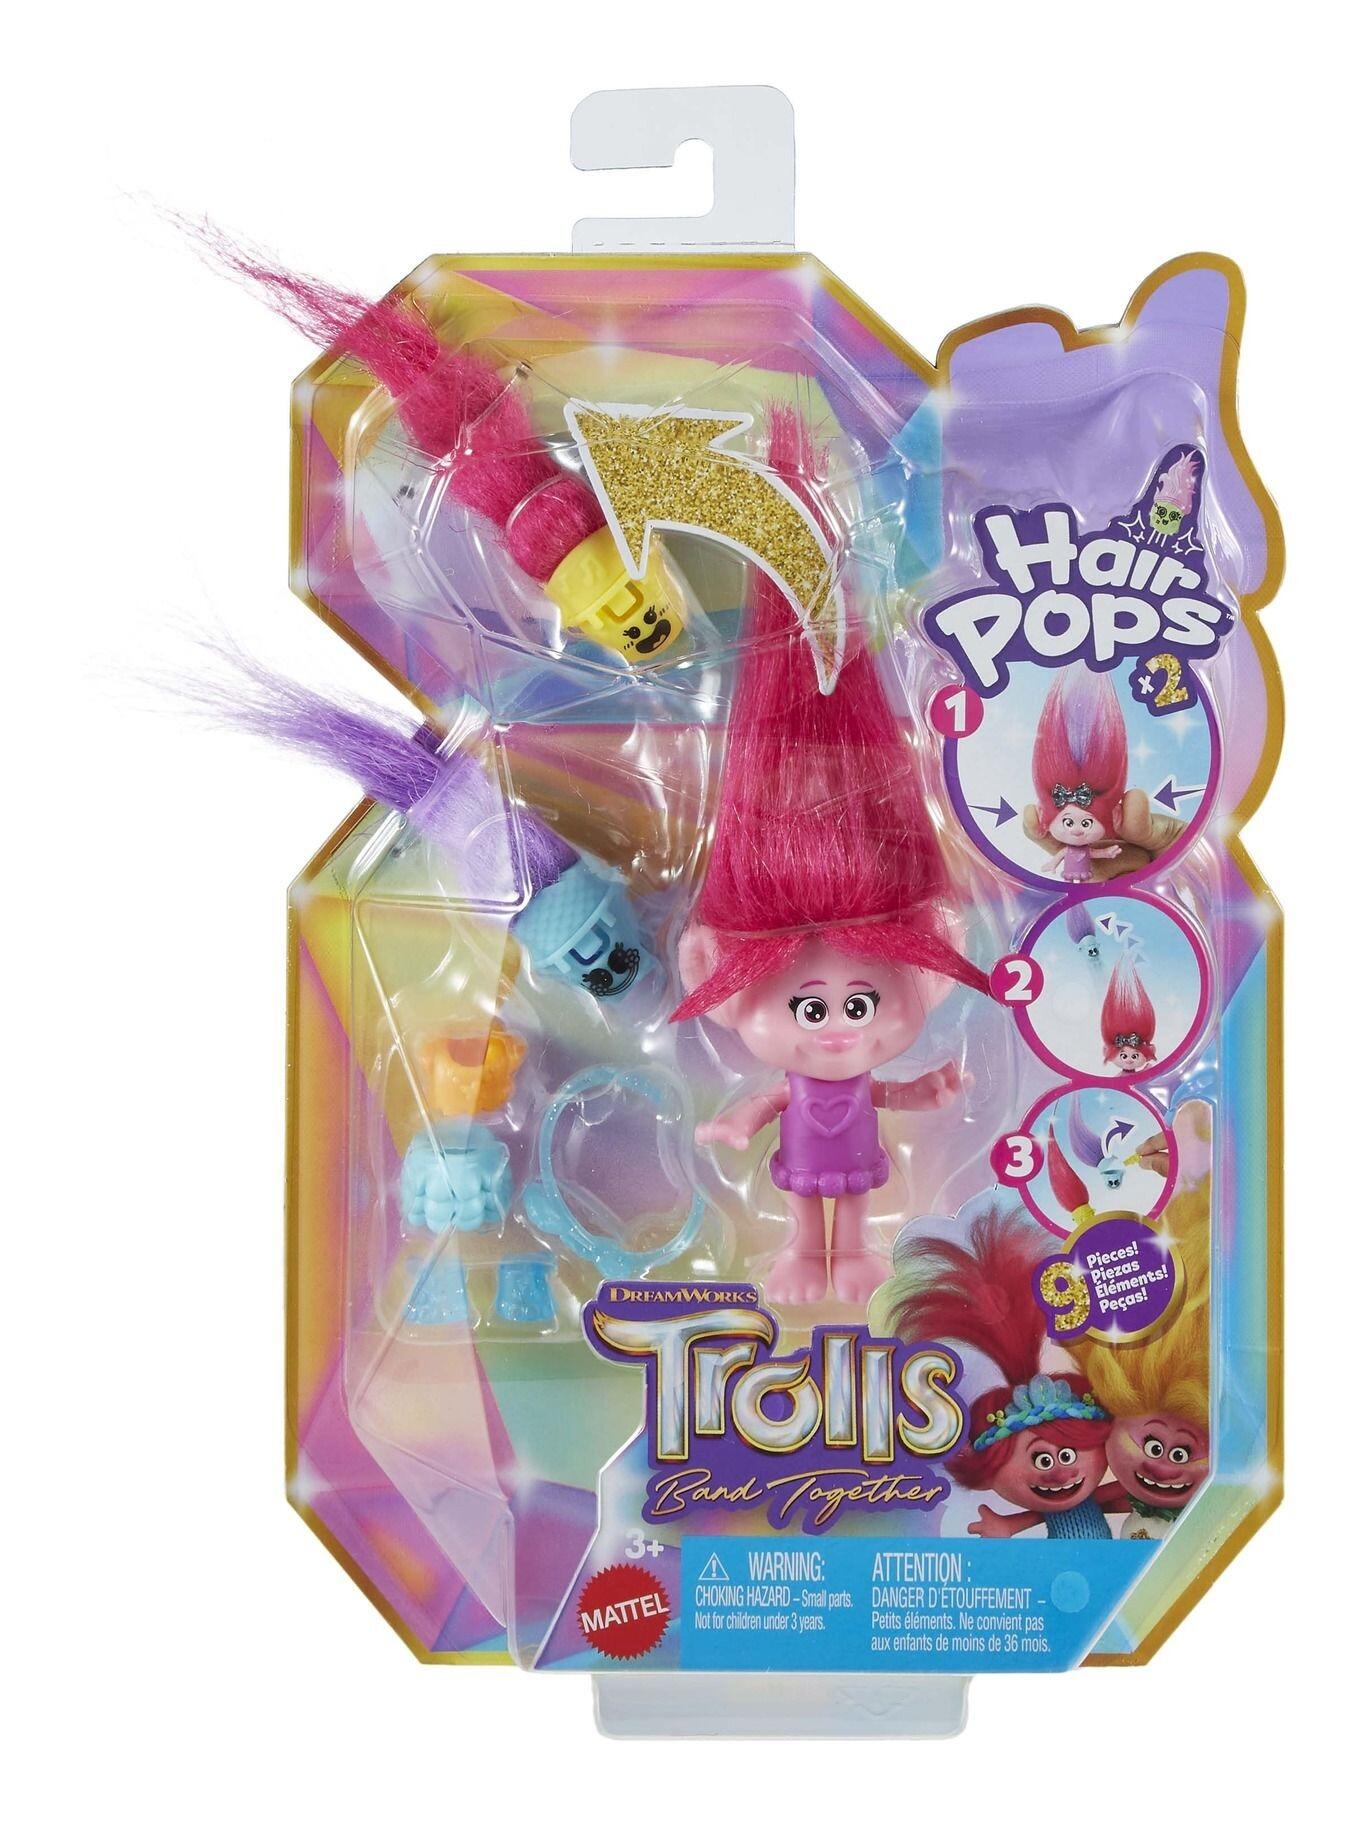 Trolls Band Together Hair Pops Surprise Poppy Doll | Top Pick Toys ...